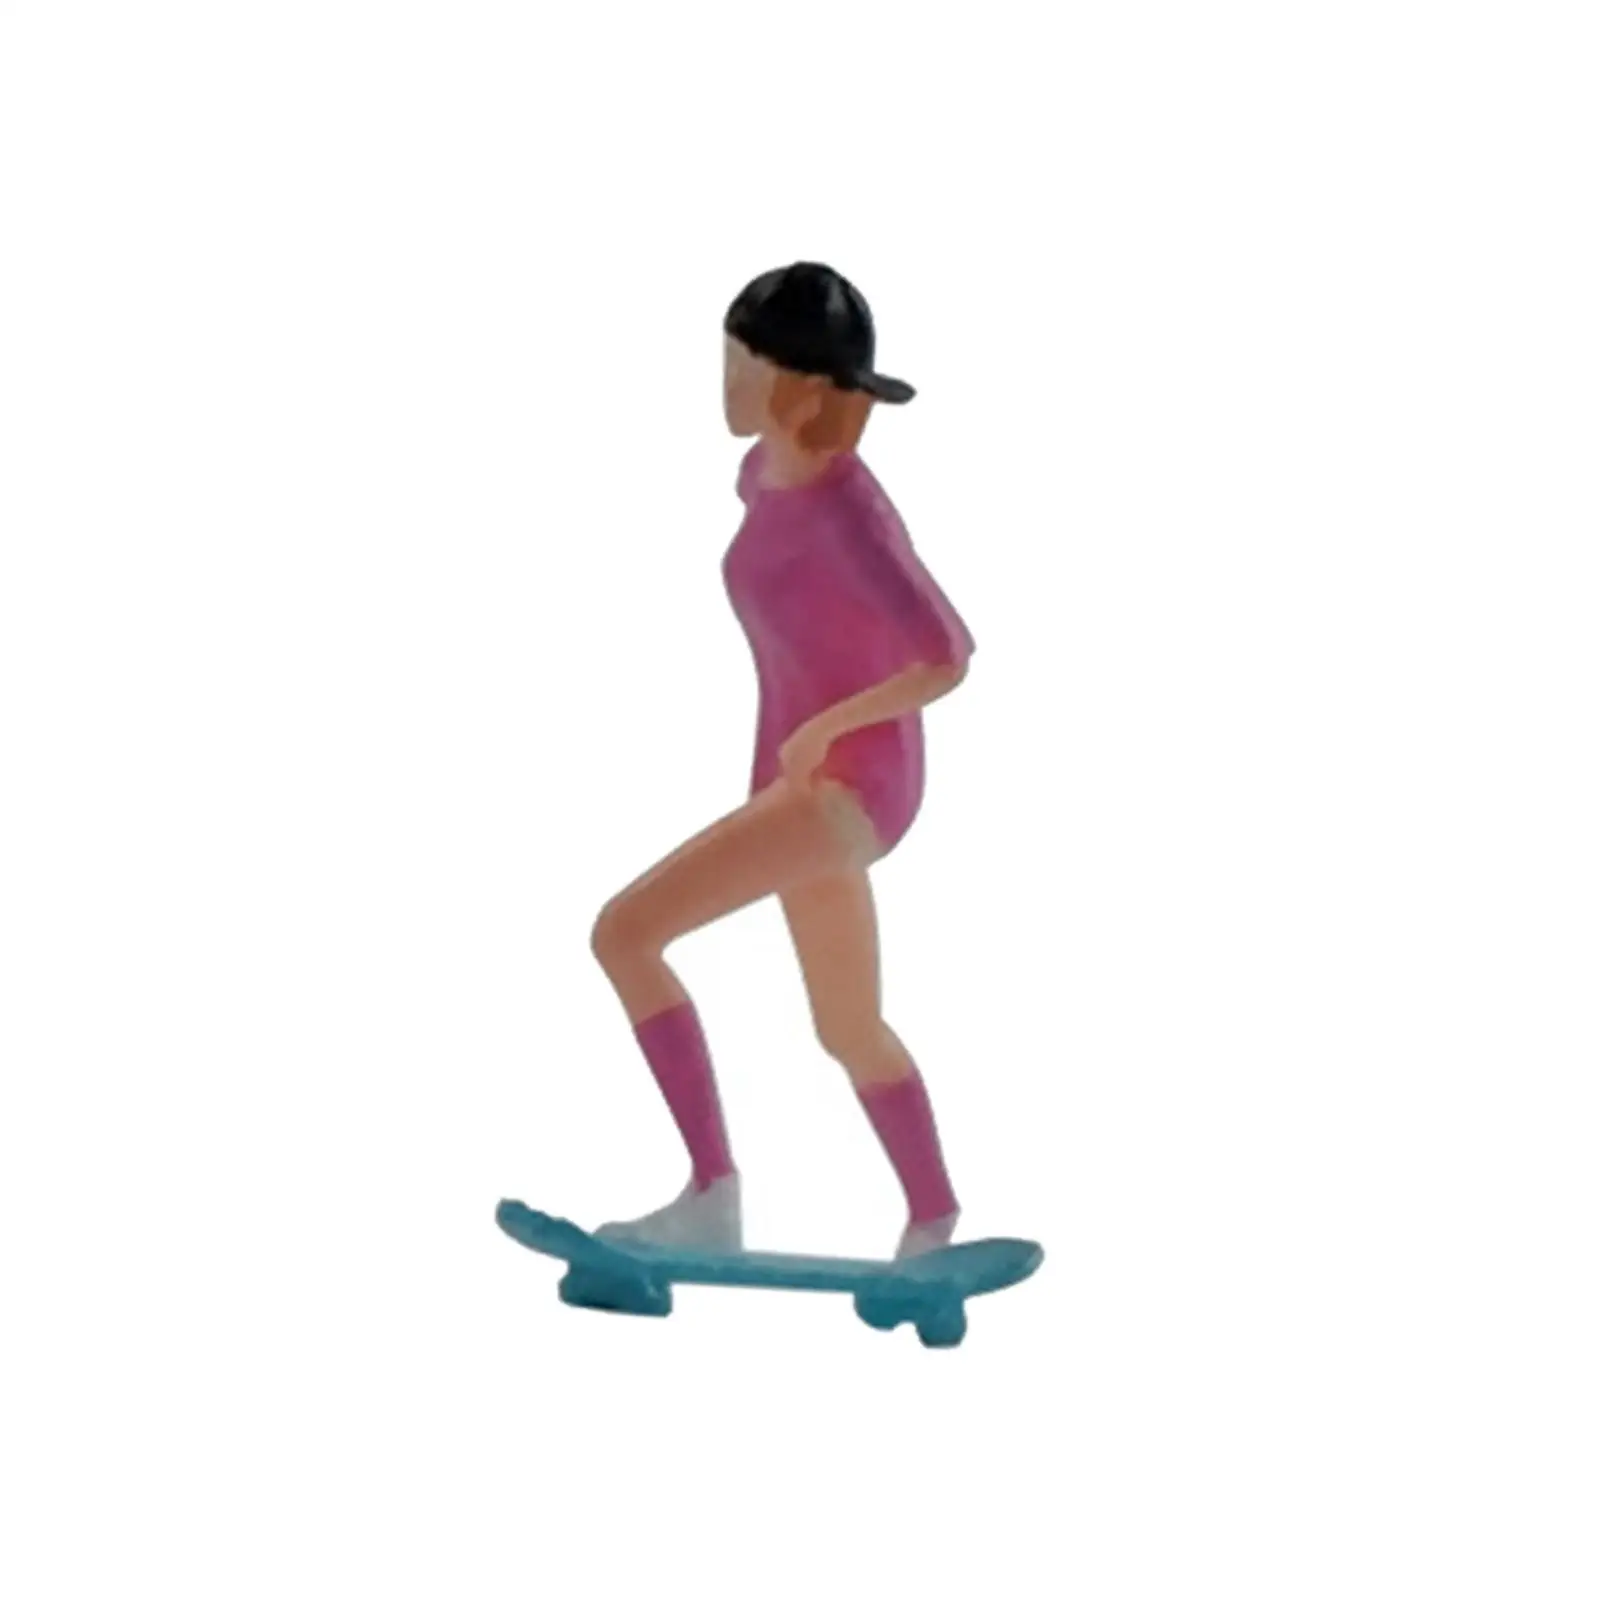 1/64 Scale People Figurines Skateboard Girl People for DIY Projects Layout